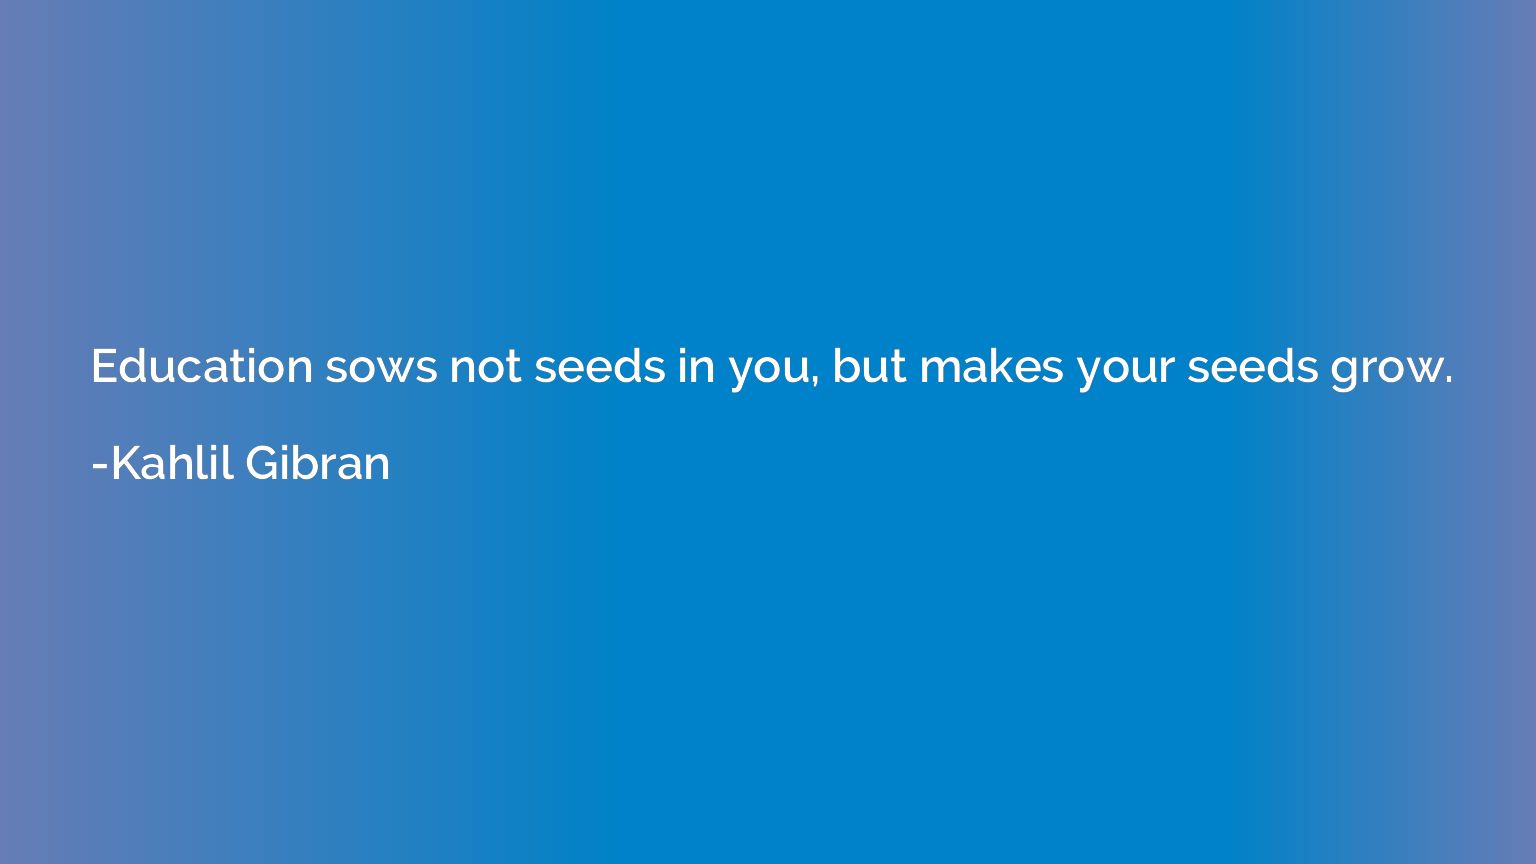 Education sows not seeds in you, but makes your seeds grow.